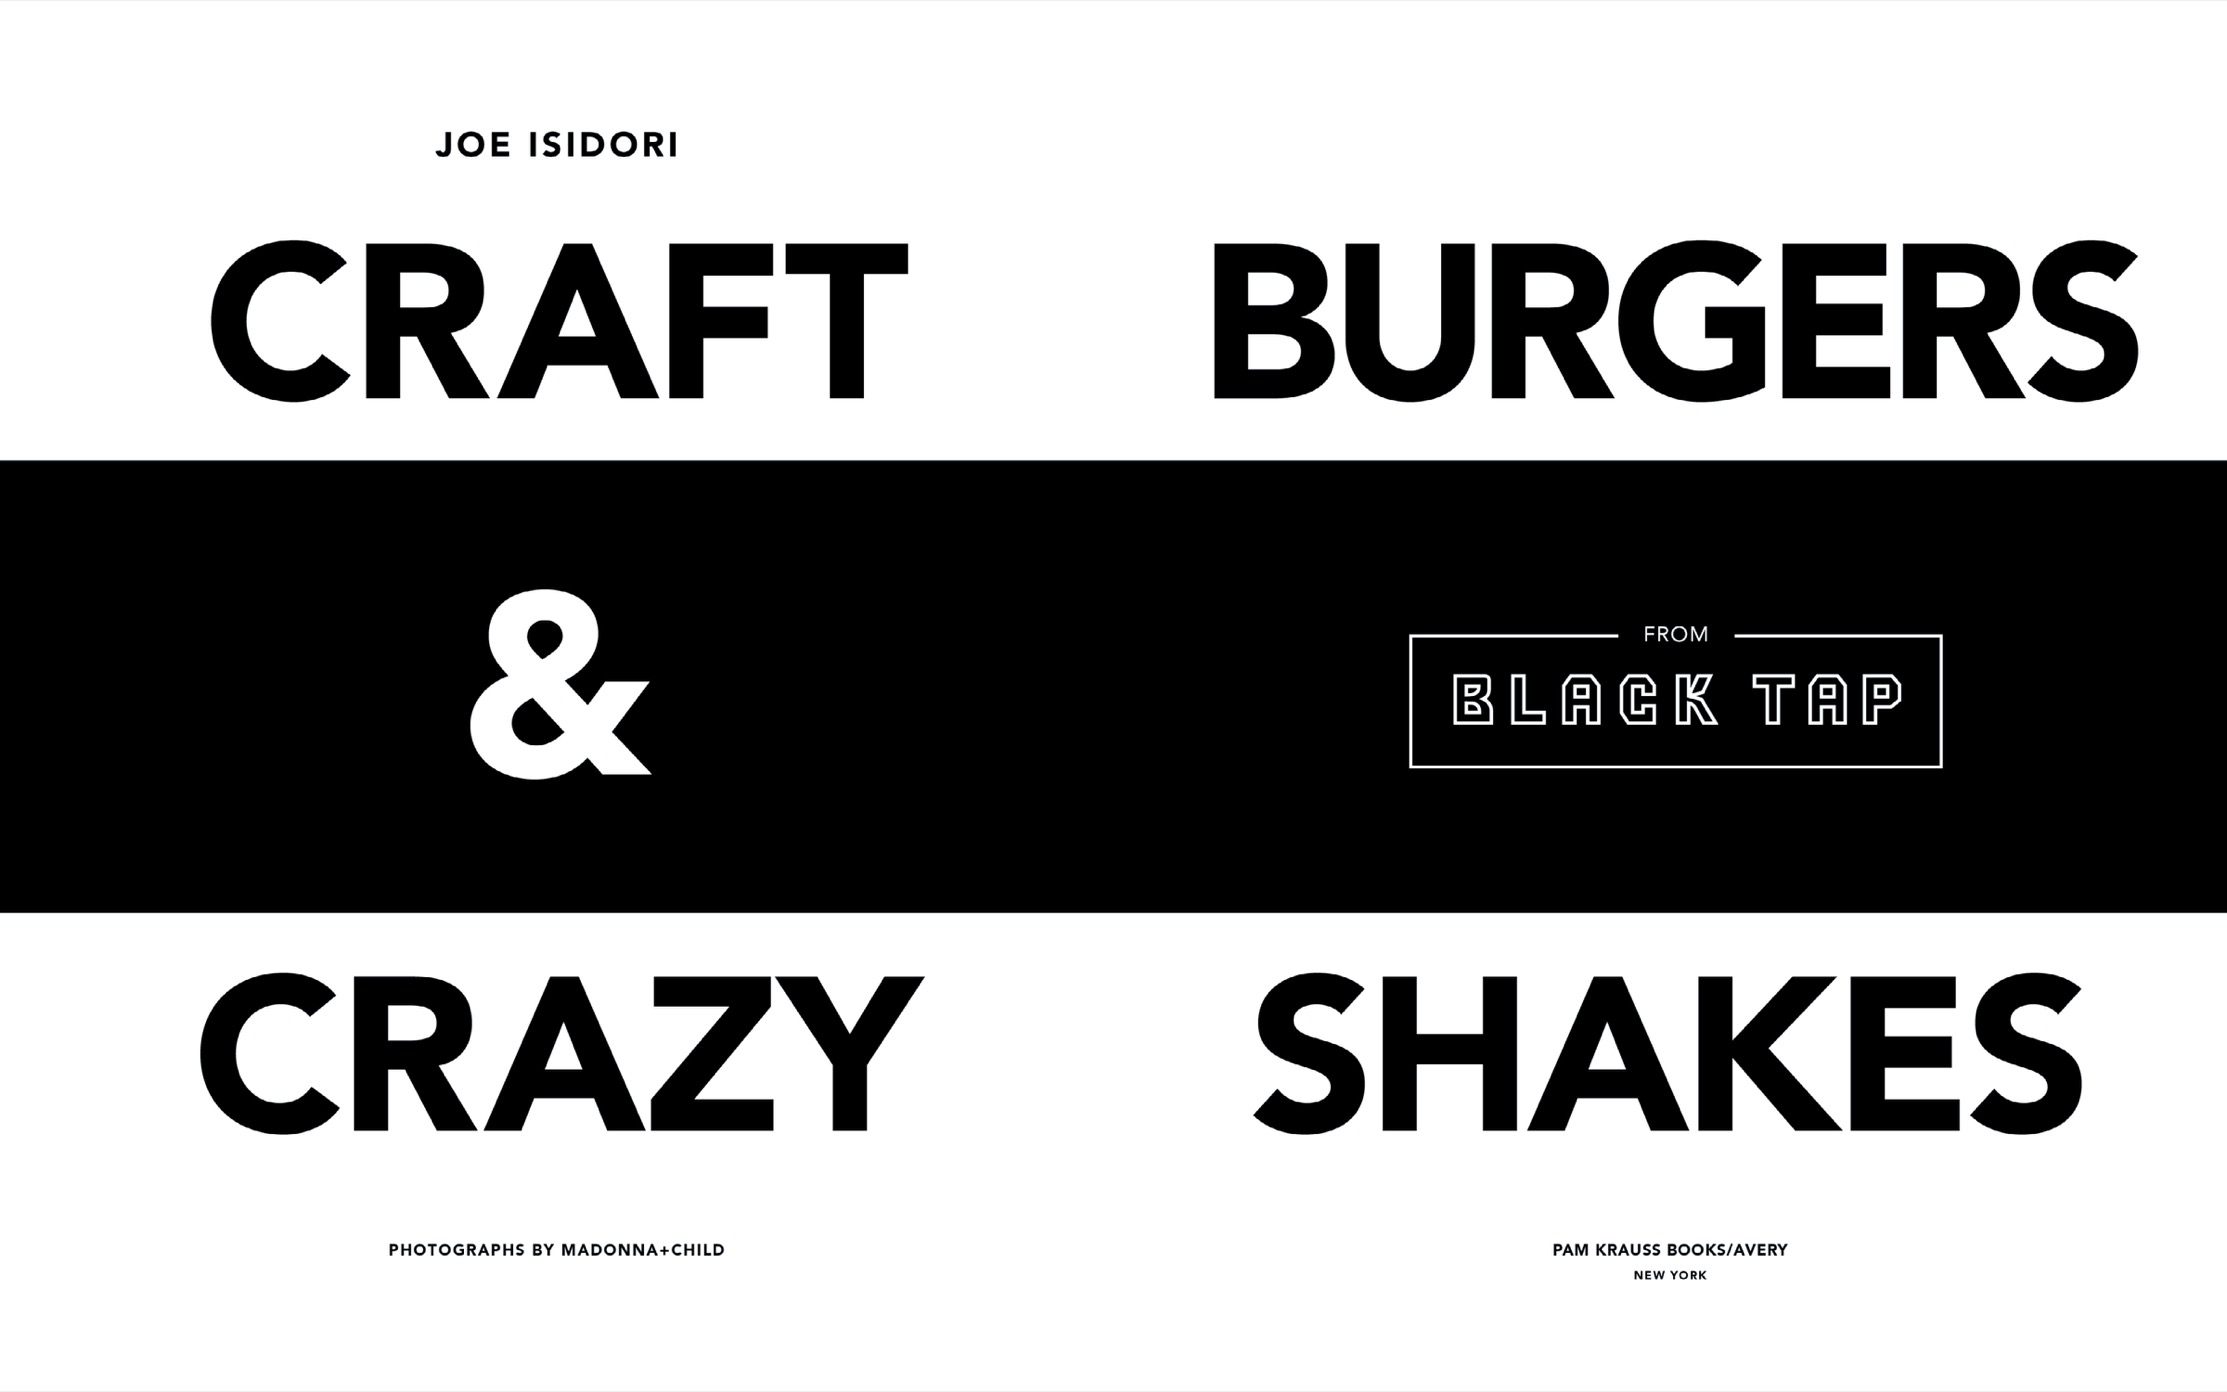 Craft Burgers and Crazy Shakes from Black Tap - image 2